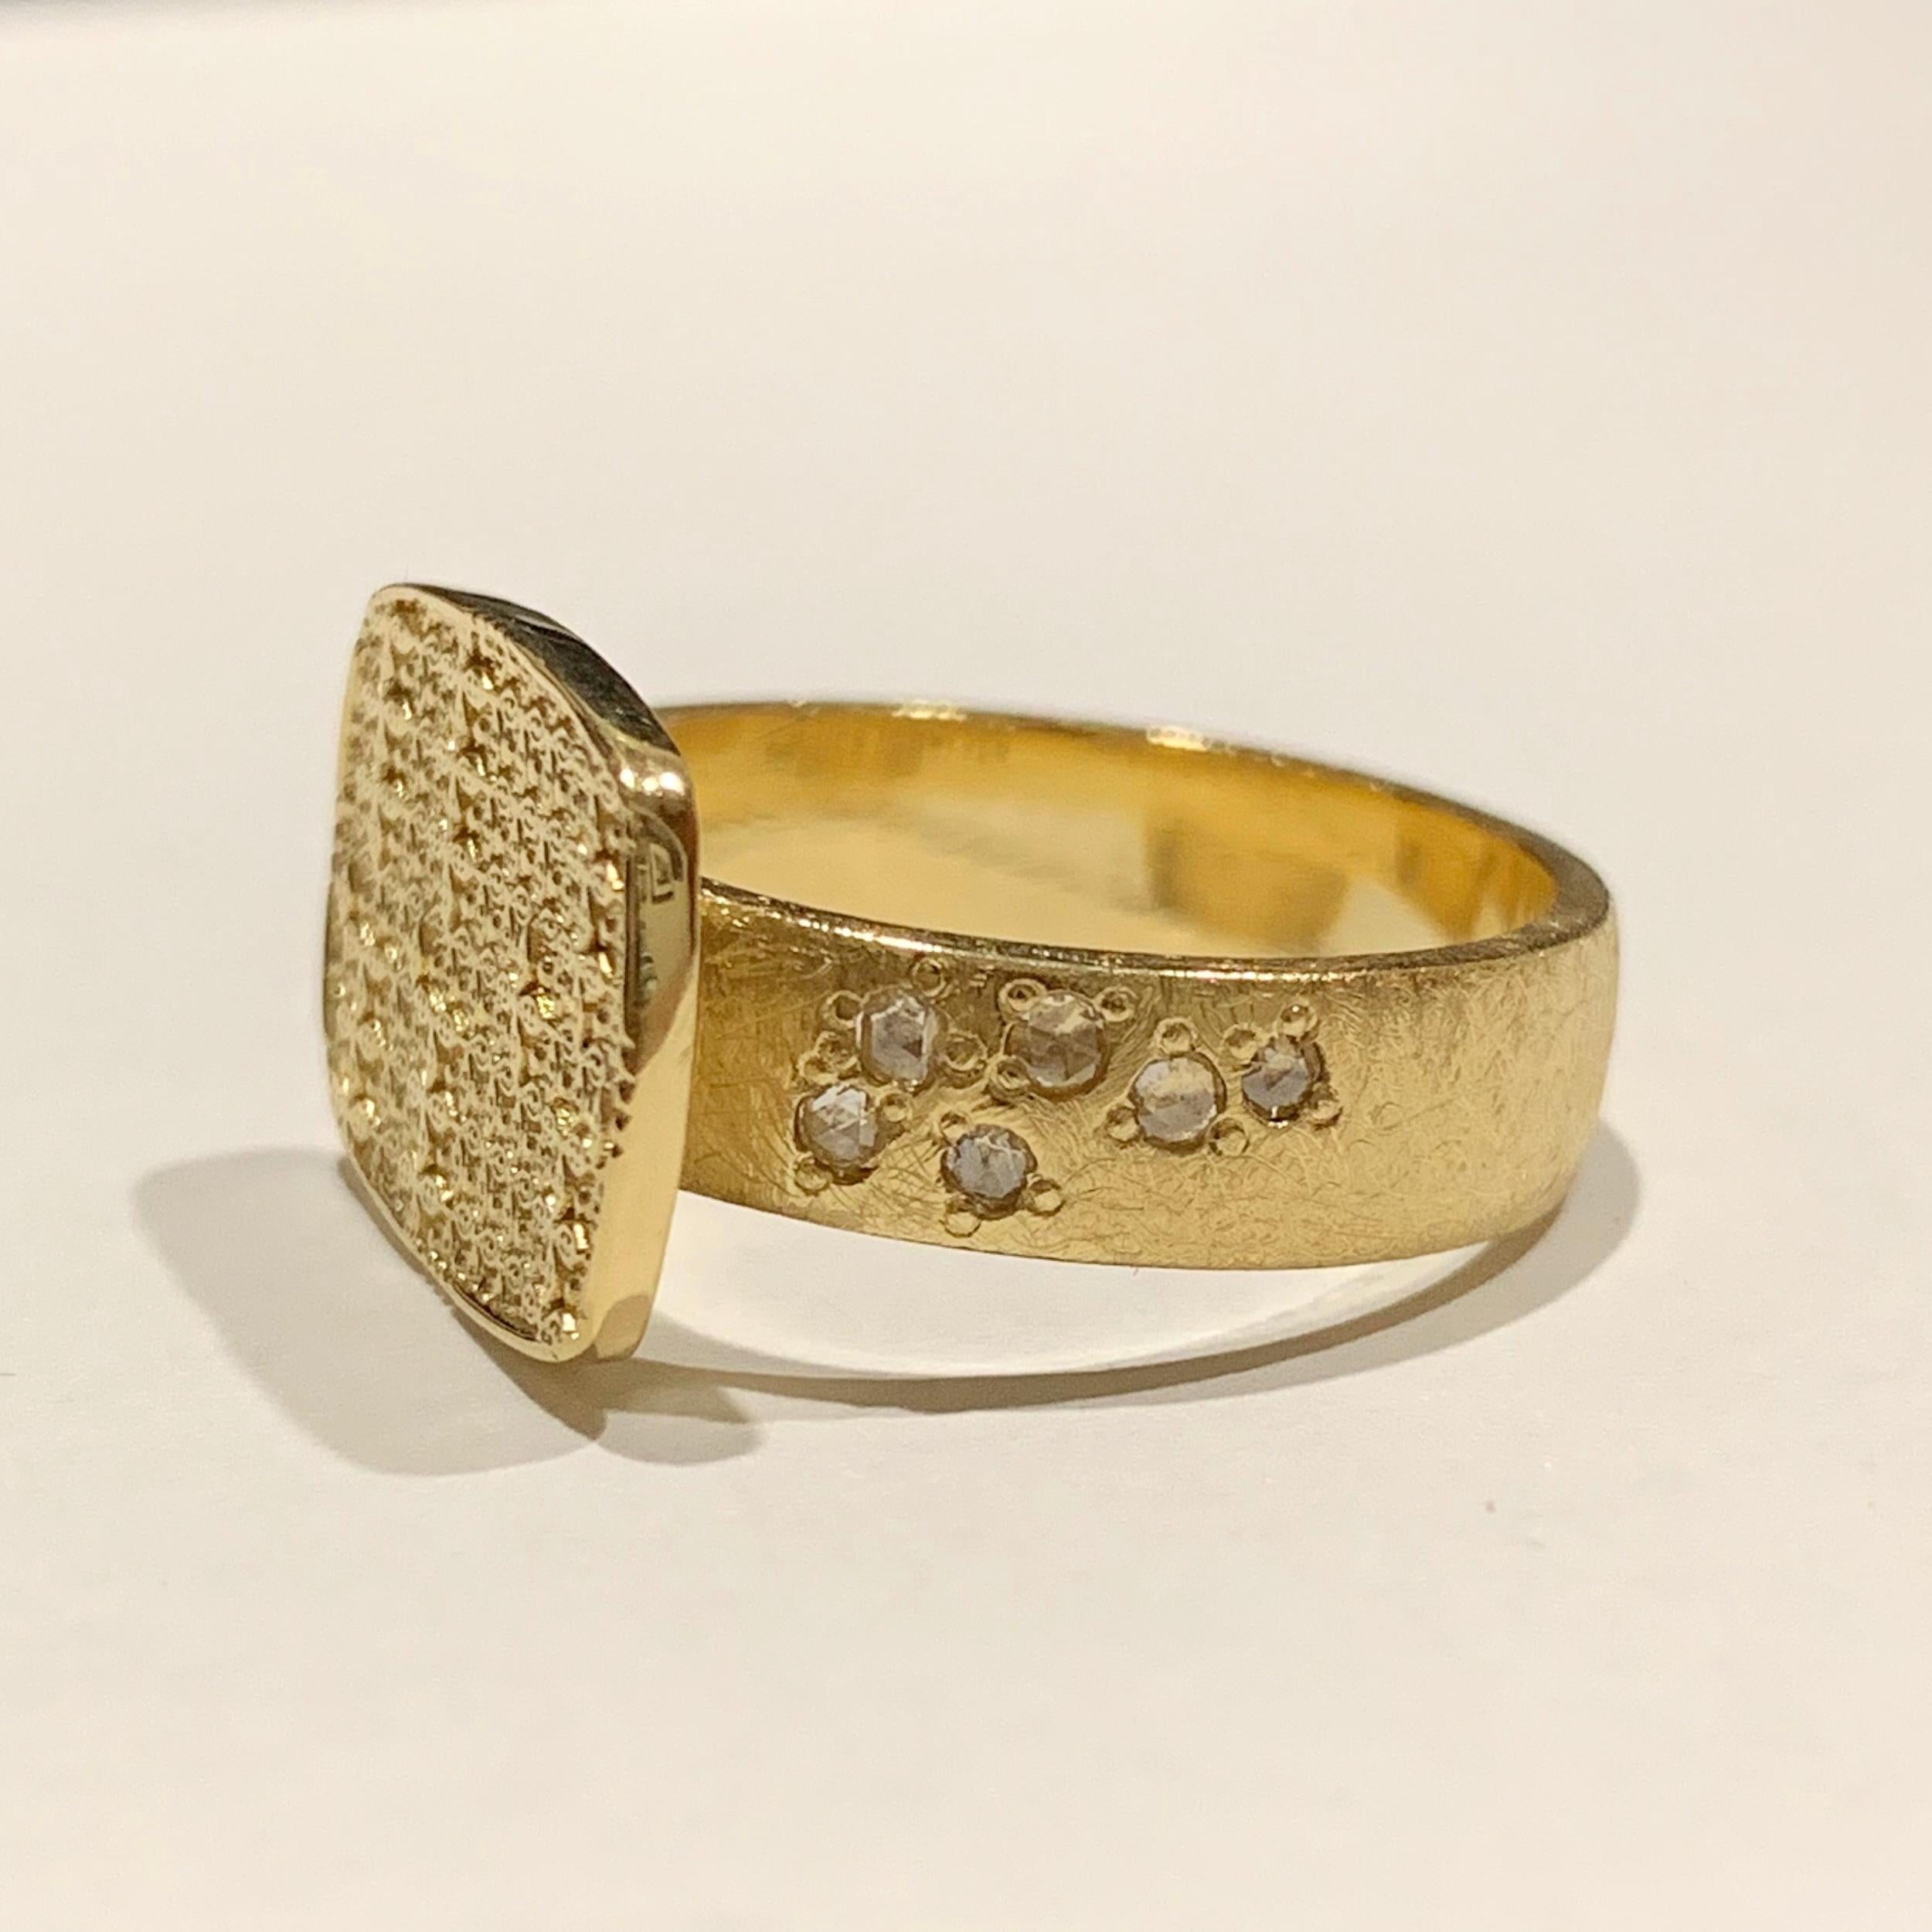 Contemporary Luca Jouel Rose Cut Diamond Antique Patterned Statement Ring in 18 Carat Gold For Sale